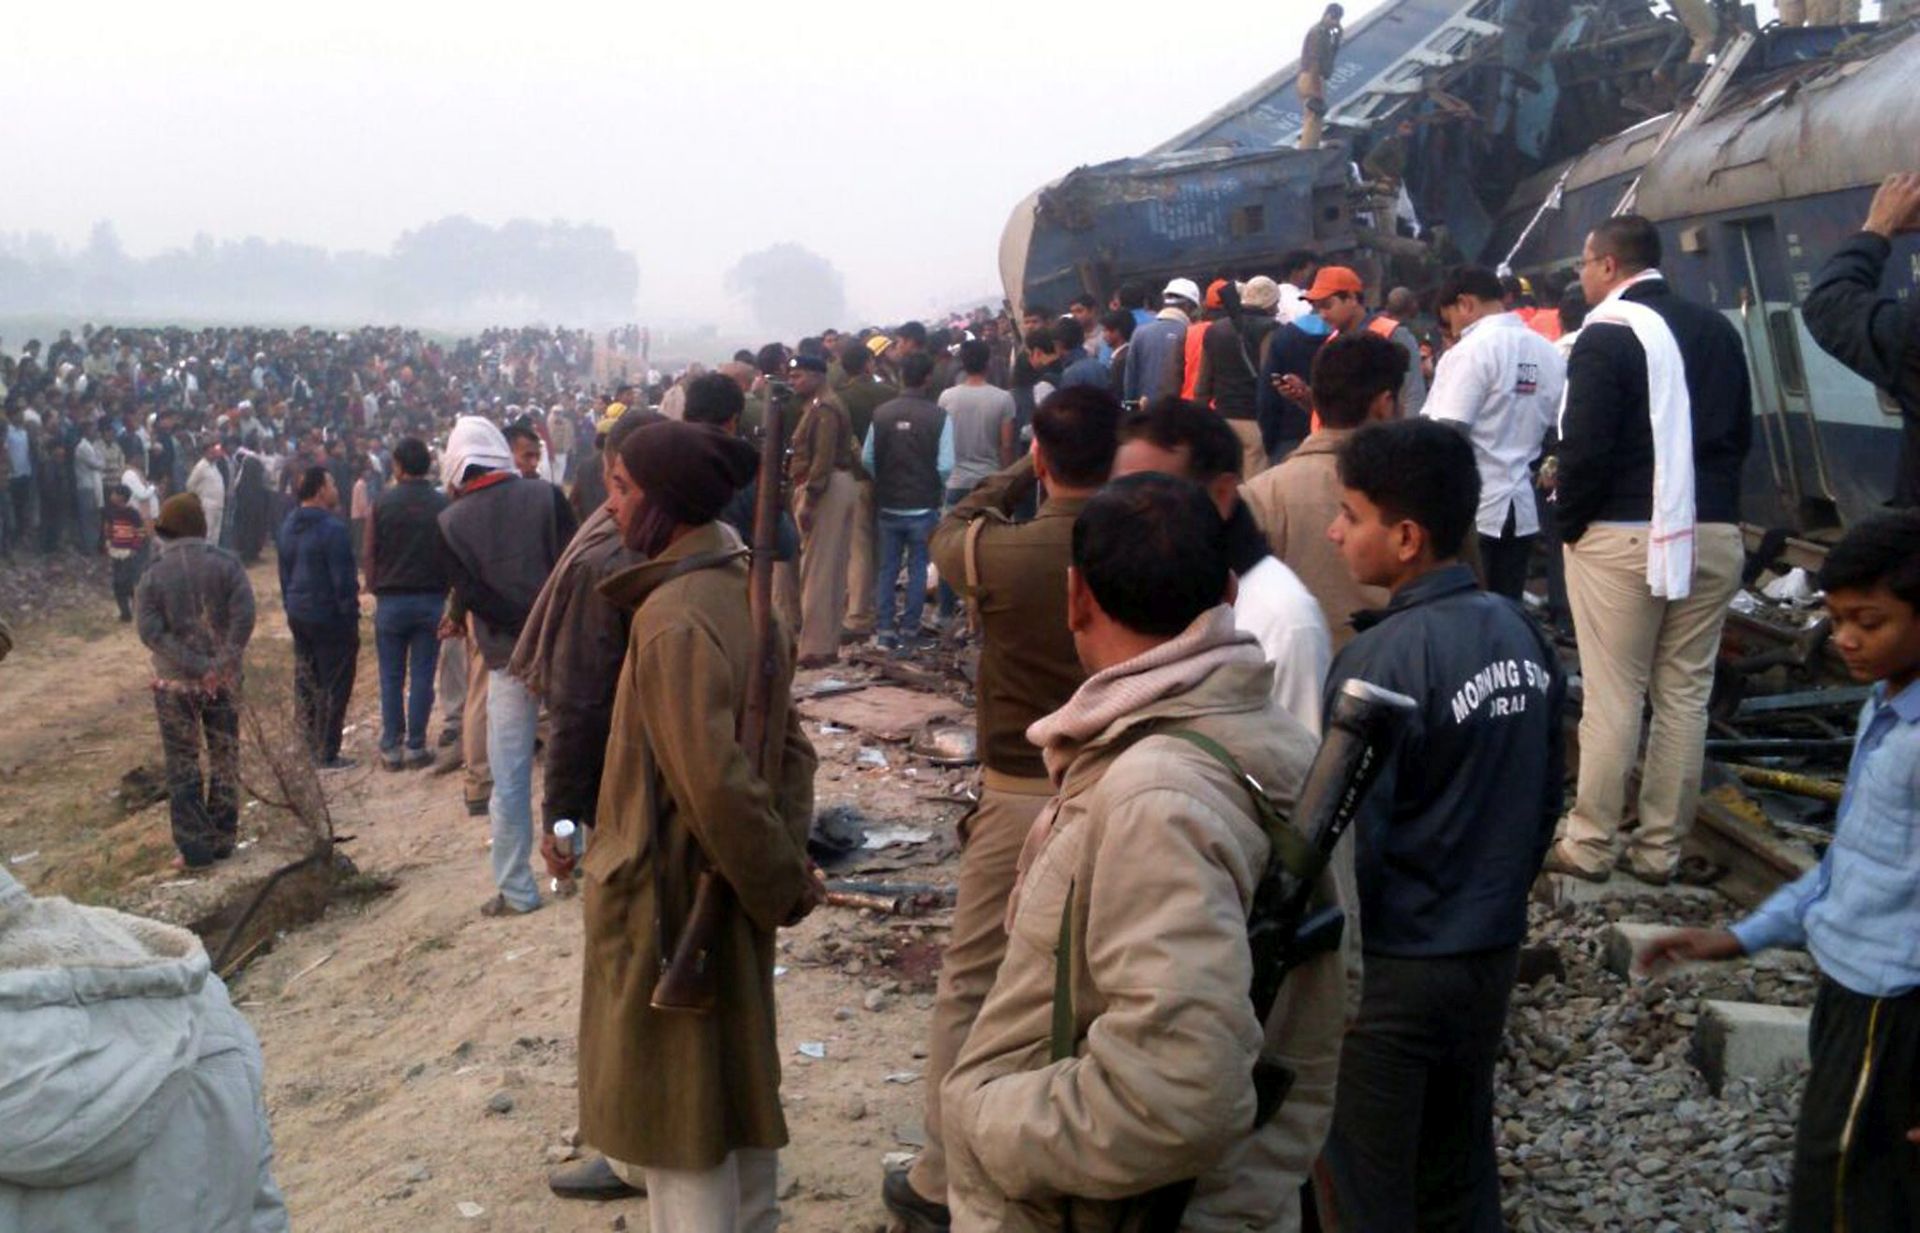 epa05639140 People gather at the spot as rescue works continue at the site of an accident where coaches of an Indore-Patna Express train derailed off the tracks, near Pukhrayan area, in Kanpur, India, 20 November 2016. According to reports, over 60 people were killed and more than 100 were injured after 14 coaches of an Indore-Patna Express train derailed in the early morning hours.  EPA/RITESH SHUKLA -- BEST QUALITY AVAILABLE